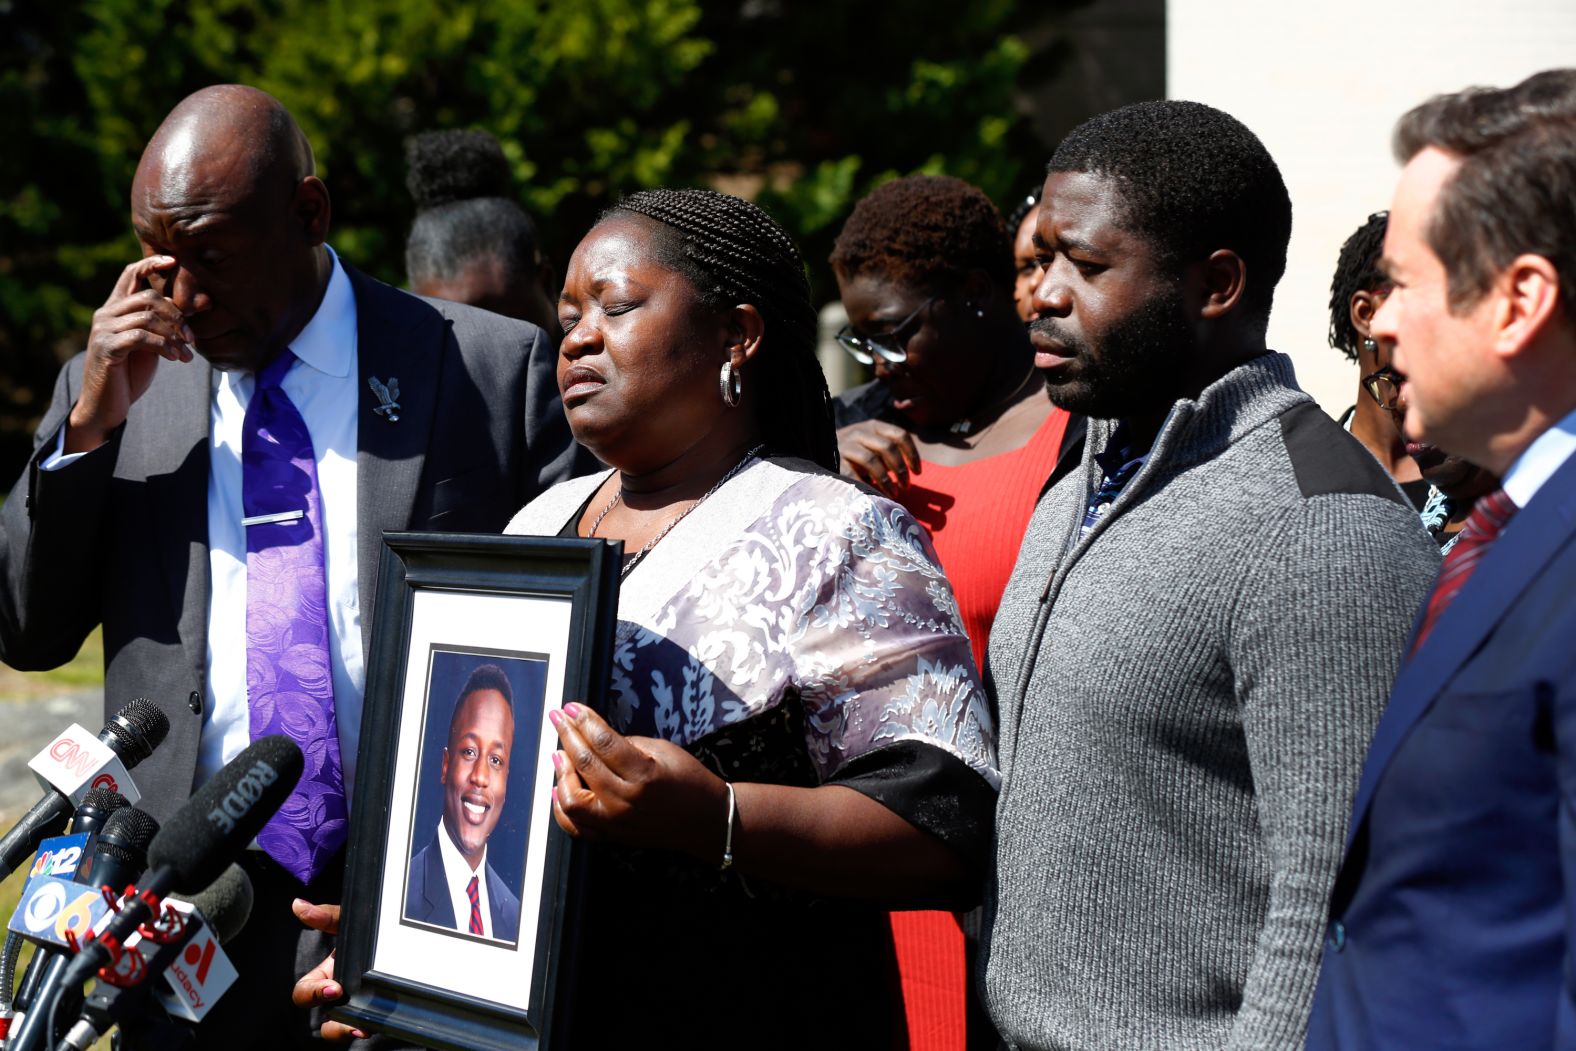 Caroline Ouko, the mother of Irvo Otieno, holds a portrait of her son during a news conference in Dinwiddie, Virginia, on Thursday, March 16. Otieno, 28, was smothered to death earlier this month at a state mental health facility, a prosecutor said. Seven Henrico County sheriff's deputies and three hospital security guards <a href="index.php?page=&url=https%3A%2F%2Fwww.cnn.com%2F2023%2F03%2F20%2Fus%2Firvo-otieno-family-virginia-death%2Findex.html" target="_blank">have been charged with second-degree murder</a>. Otieno's family said the aspiring rapper was having a mental health crisis when he died.